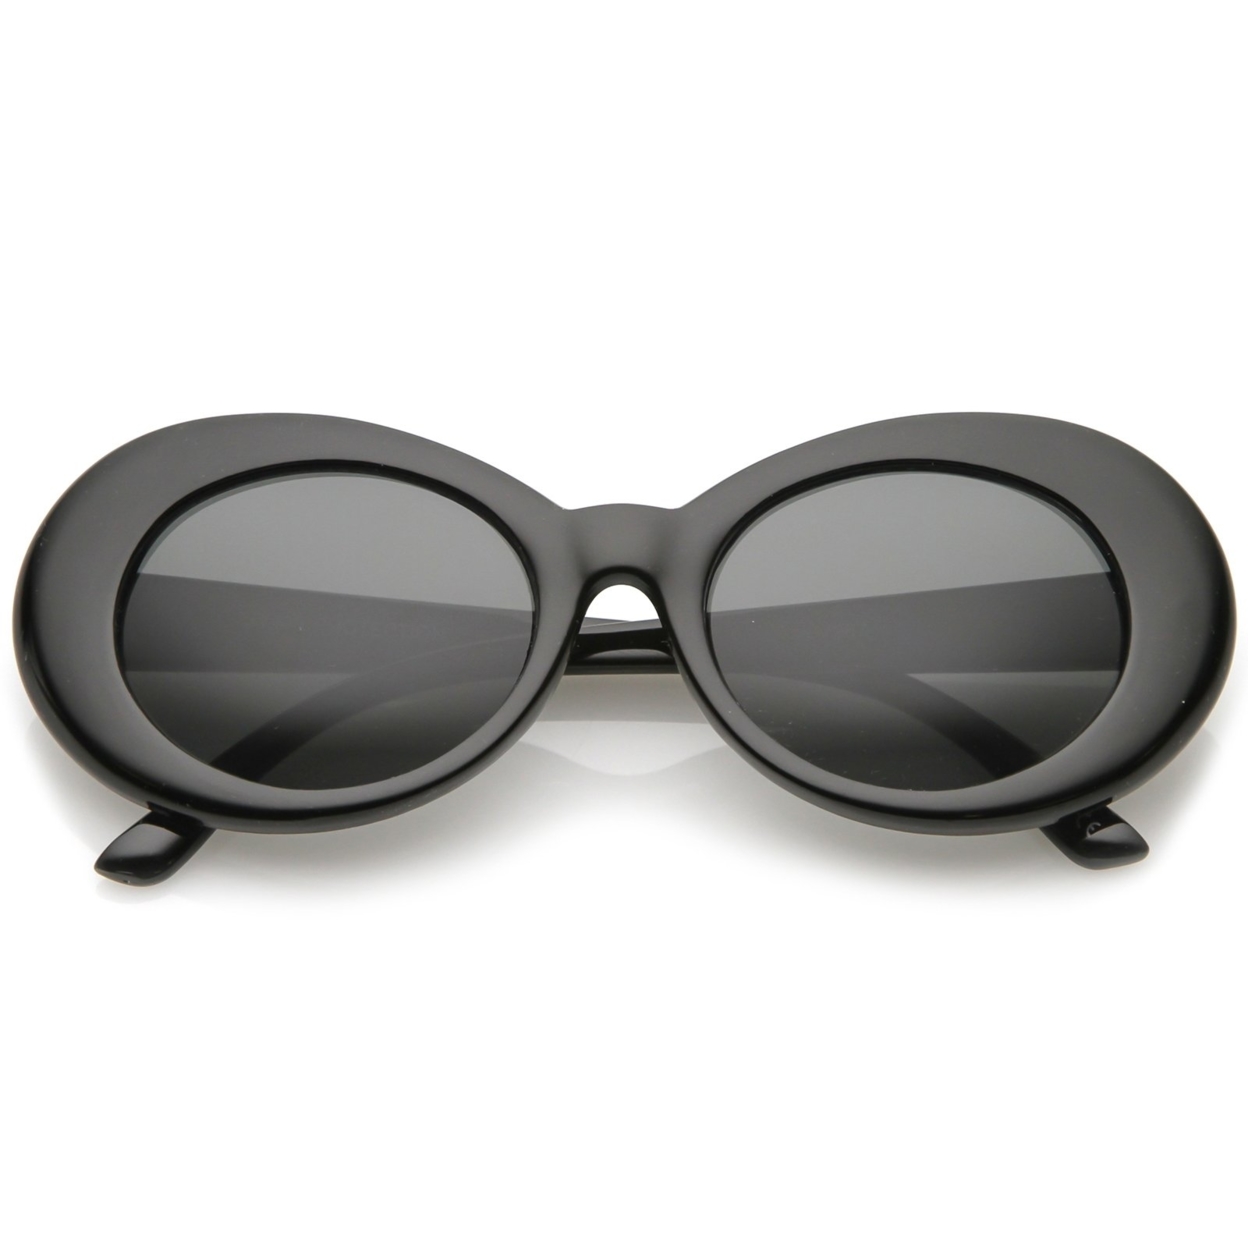 Retro Oval Sunglasses With Tapered Arms Neutral Colored Round Lens 51mm - Black / Smoke